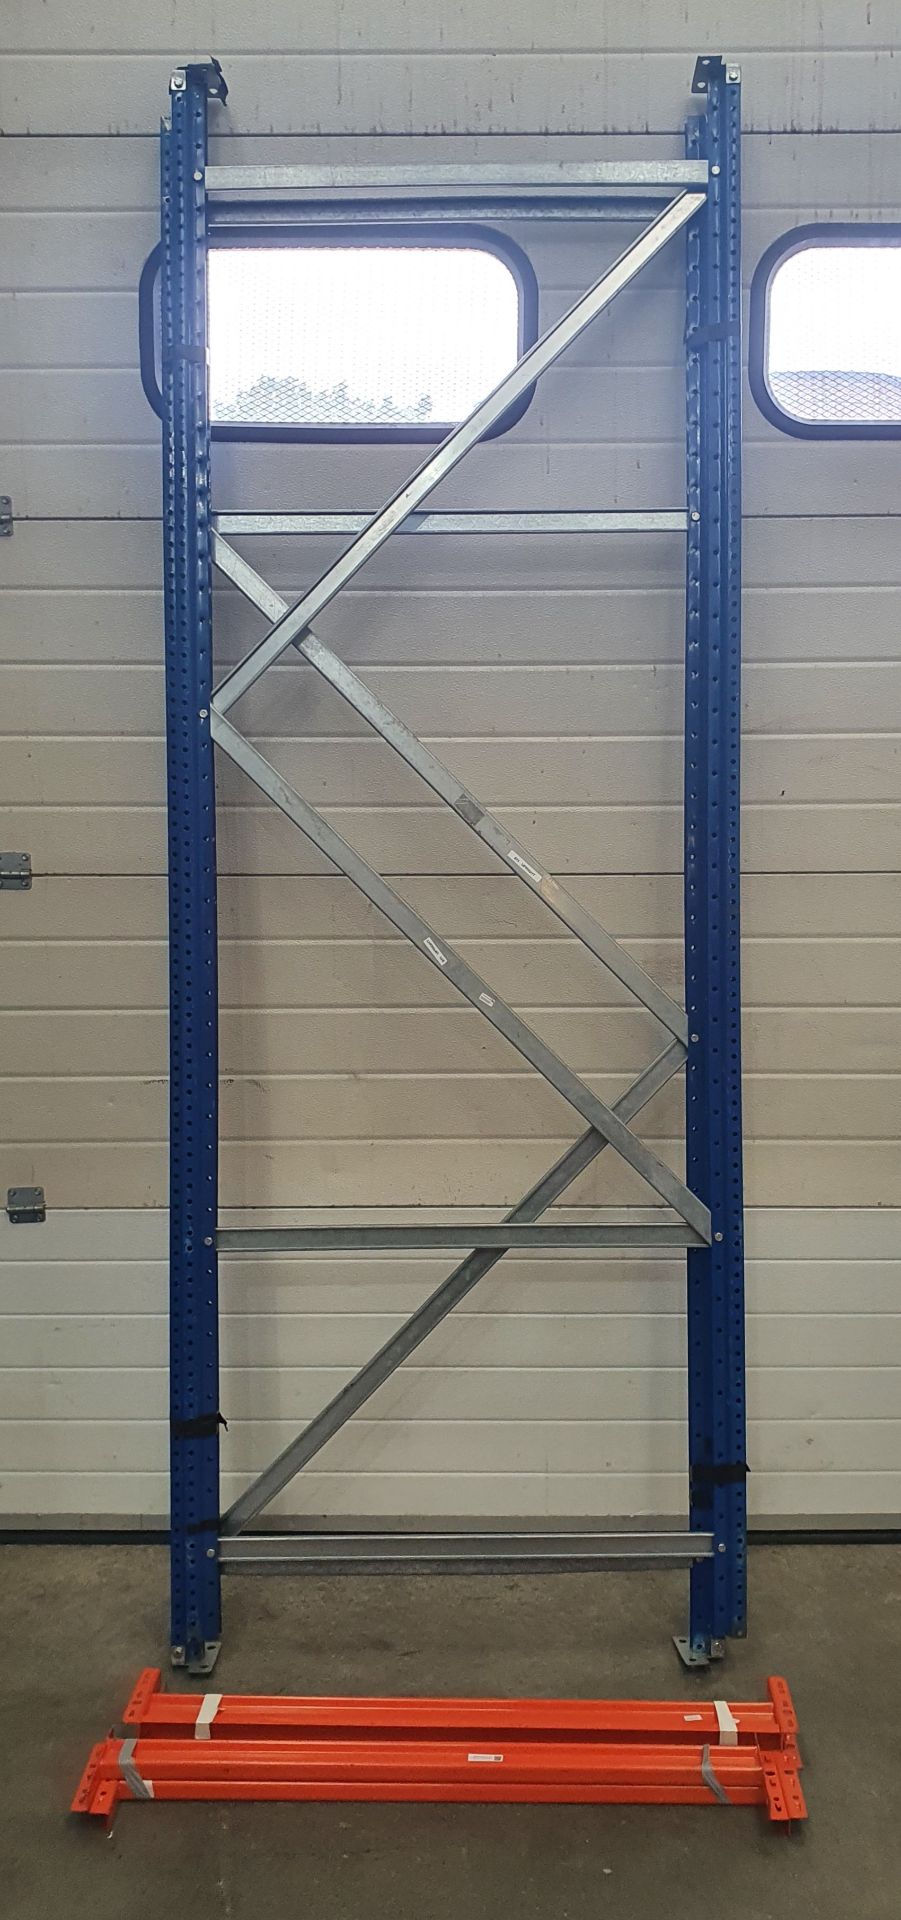 A Boltless Steel Rack with 2 Uprights, 8ft h, 4-1000mm Beams and 2 MDF Shelves (dismantled).